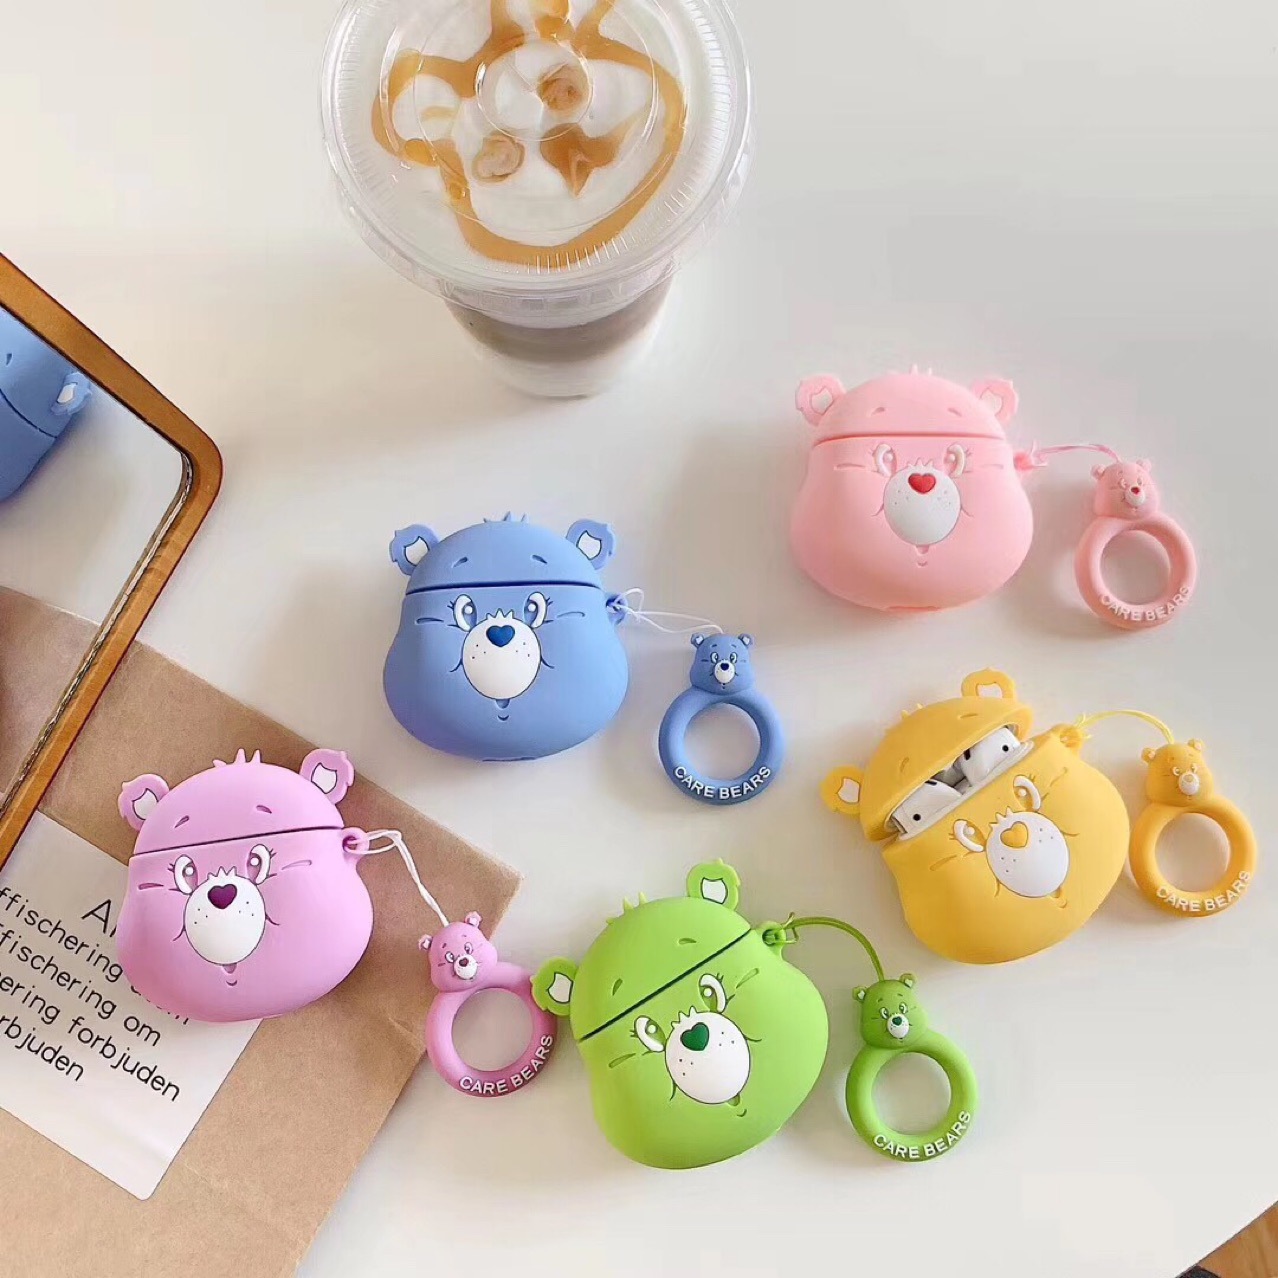 3D Cartoon Smiling Bear Design Earphone Case with Finger Ring for Airpods 1/2 Cute Candy Color Soft Cover for Airpods